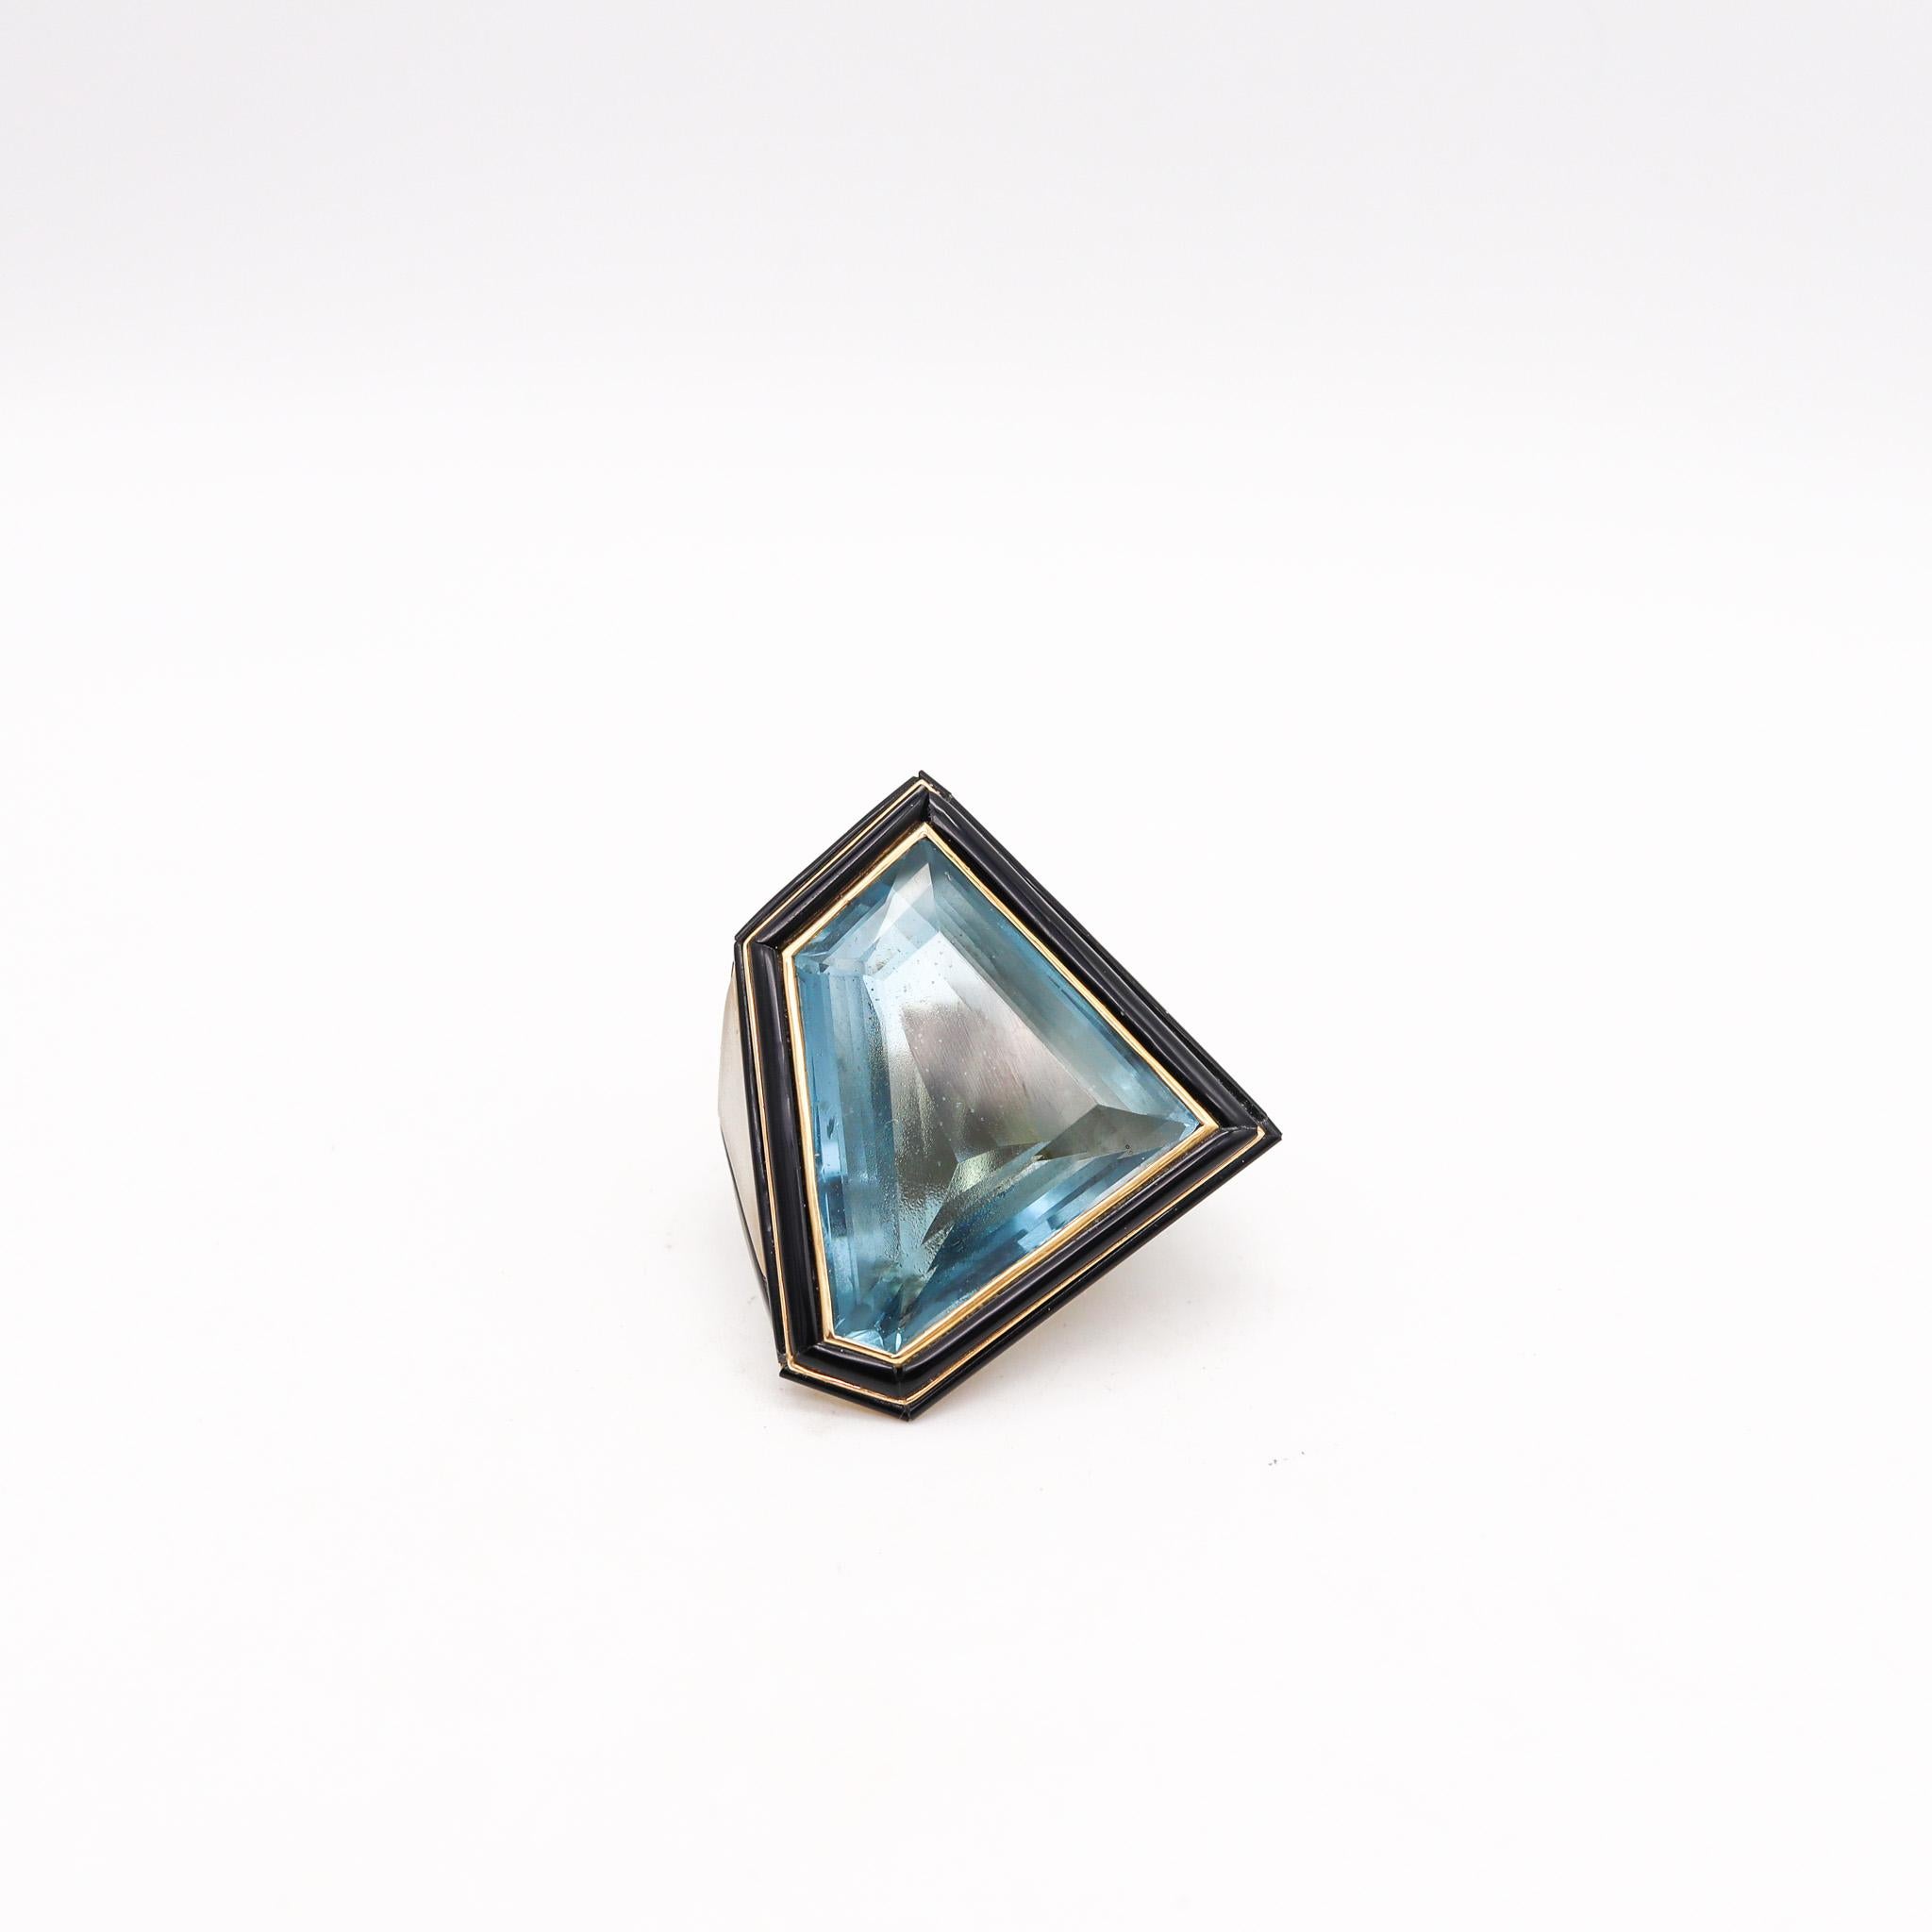 A geometric cocktail ring.

Beautiful oversized geometric cocktail ring, created in Italy during the postmodern period, back in 1980. This fabulous ring is huge and generous in size, it was made with multiple triangular, sharp and faceted shapes, in